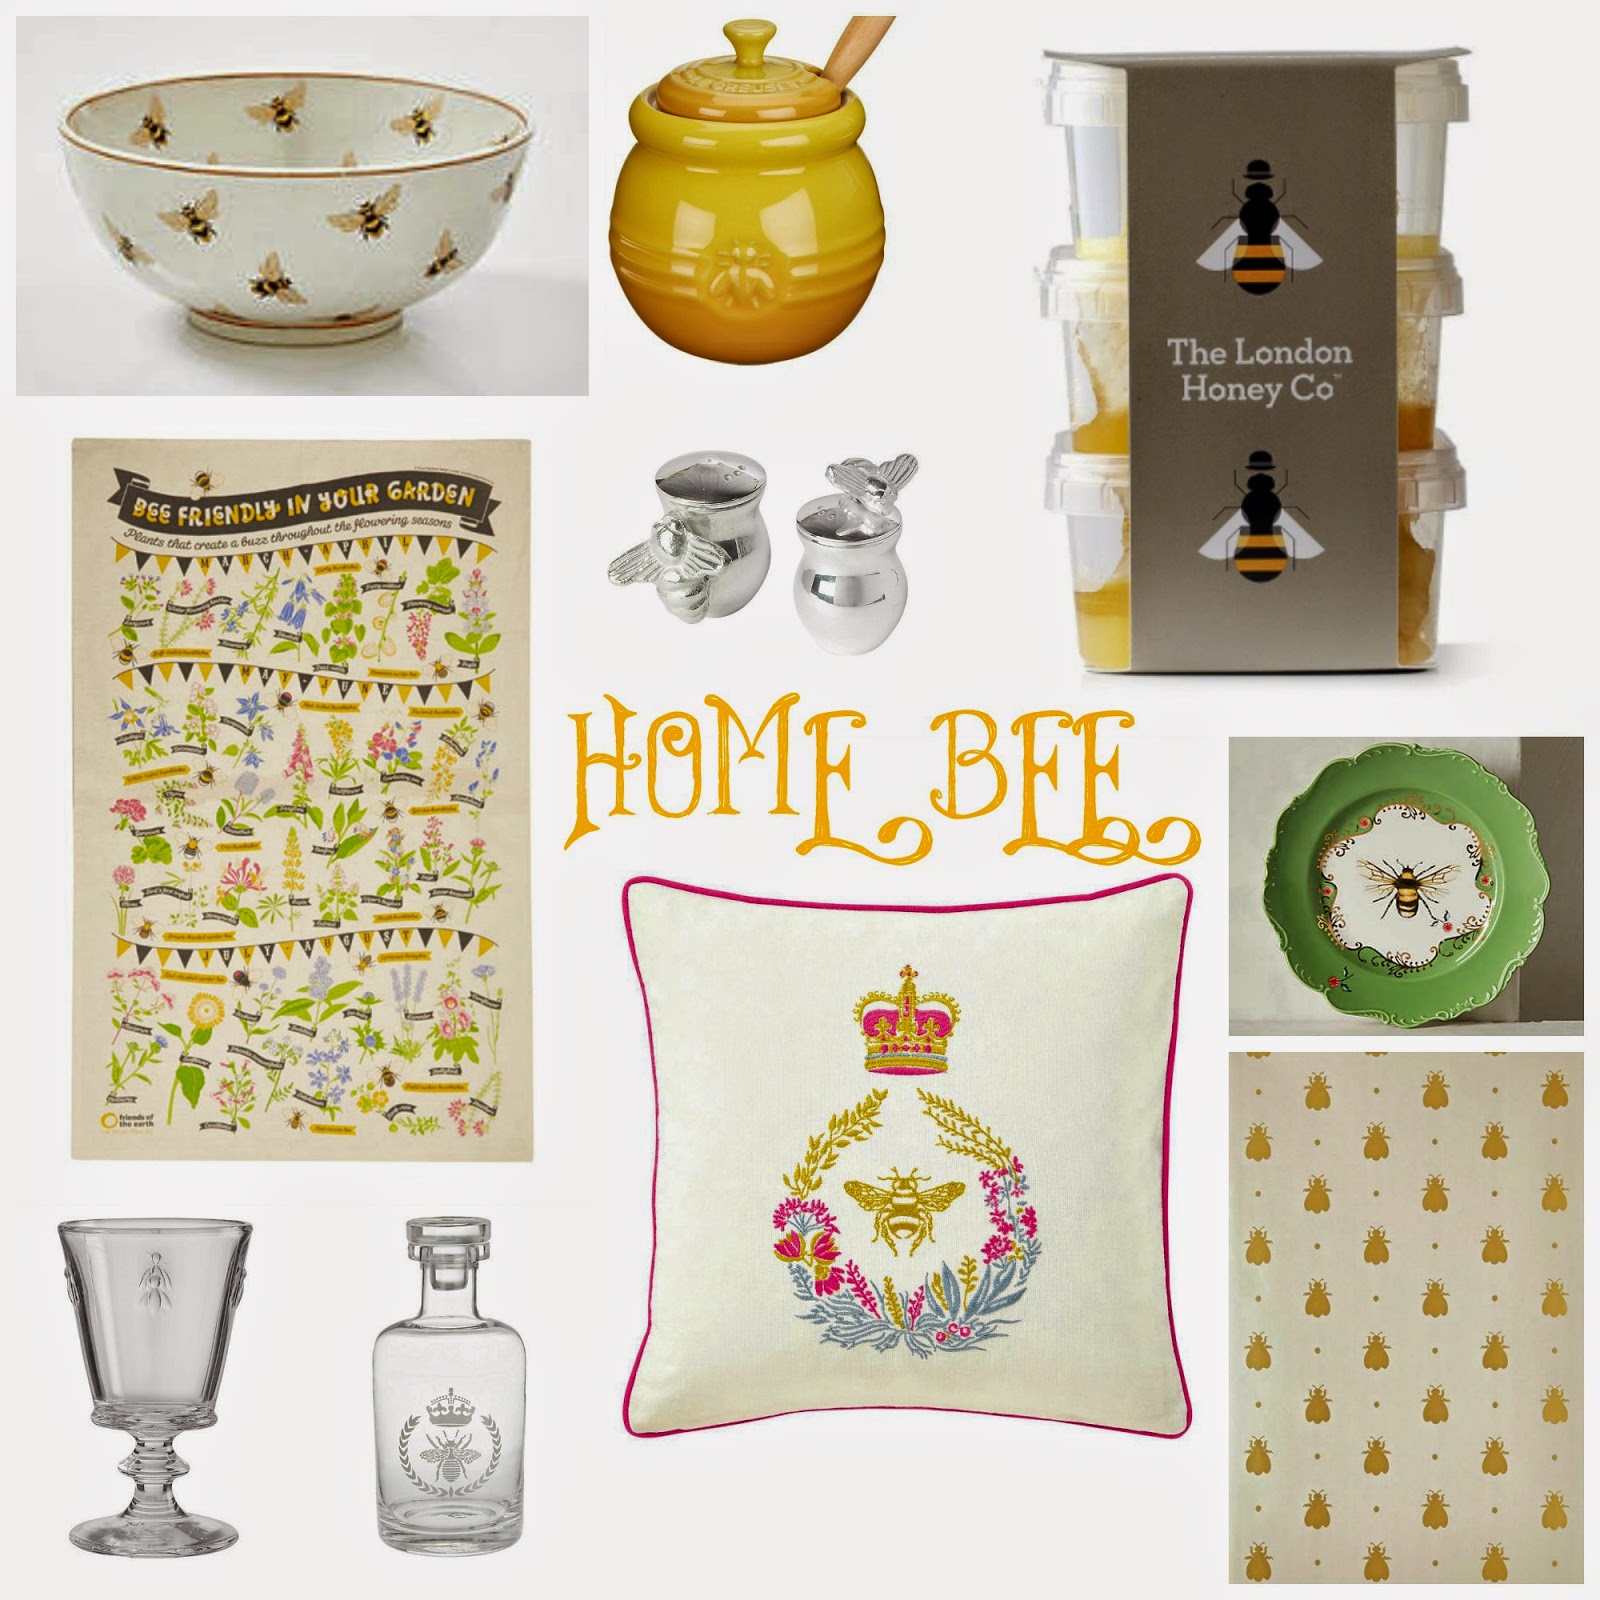 mamasVIB | V. I. BUYS: What the buzz? It's time to Save the VIB's - very important BEES!  | save the bess | bees | bug life  bee charity | JCew | crewcuts | charity tees | bumble bees | the hive | bee sting beauty | selfridges | john  lewis | bugaboo bee | liberty | bee tea towel | alex monroe | bees | bbs buys | bugs | insects | save the bees | mothercare | bee toys | bee beauty buys | bee fashion | bee print | amara | queen bee notepad | queen bee mug | bee bowl | bee cushion | shopping | style | mamasVIb | mothers meeting | event | press show | beauty buys | royal jelly | amber nectar | bee sting | honey | marc jacobs | kids fashion | mmas style | shopping buys | themes buys | bee | bumble | bee hotels | bee hives | bee keeper | books | the hive | mamasvib 